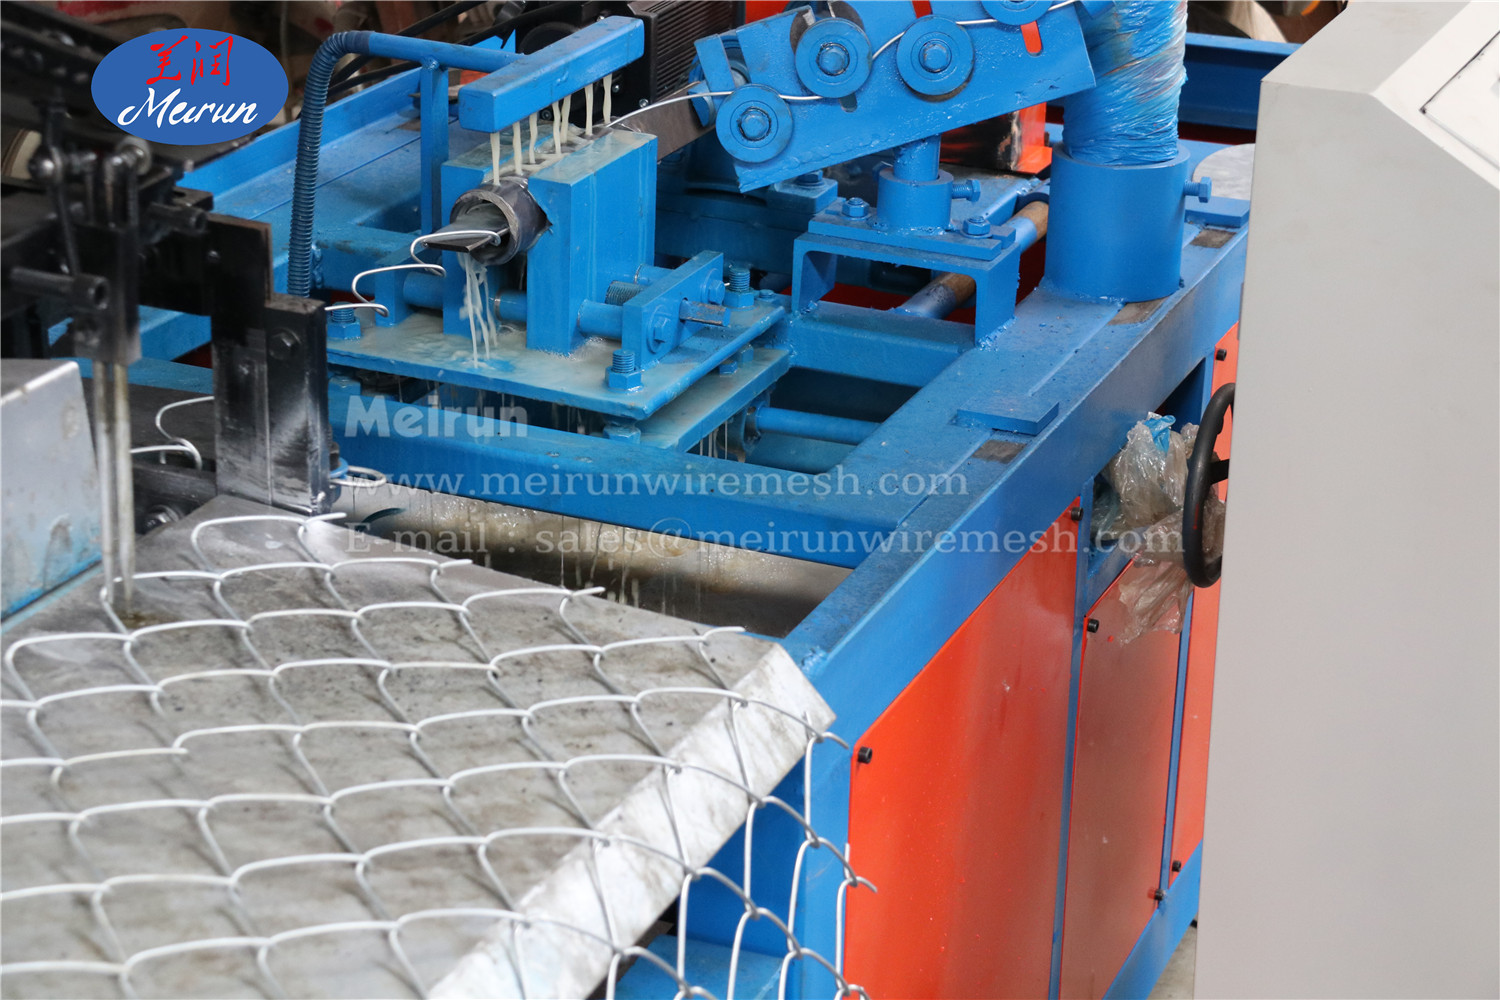 Economical And Practical Automatic Diamond Wire Mesh Net Making Machinery